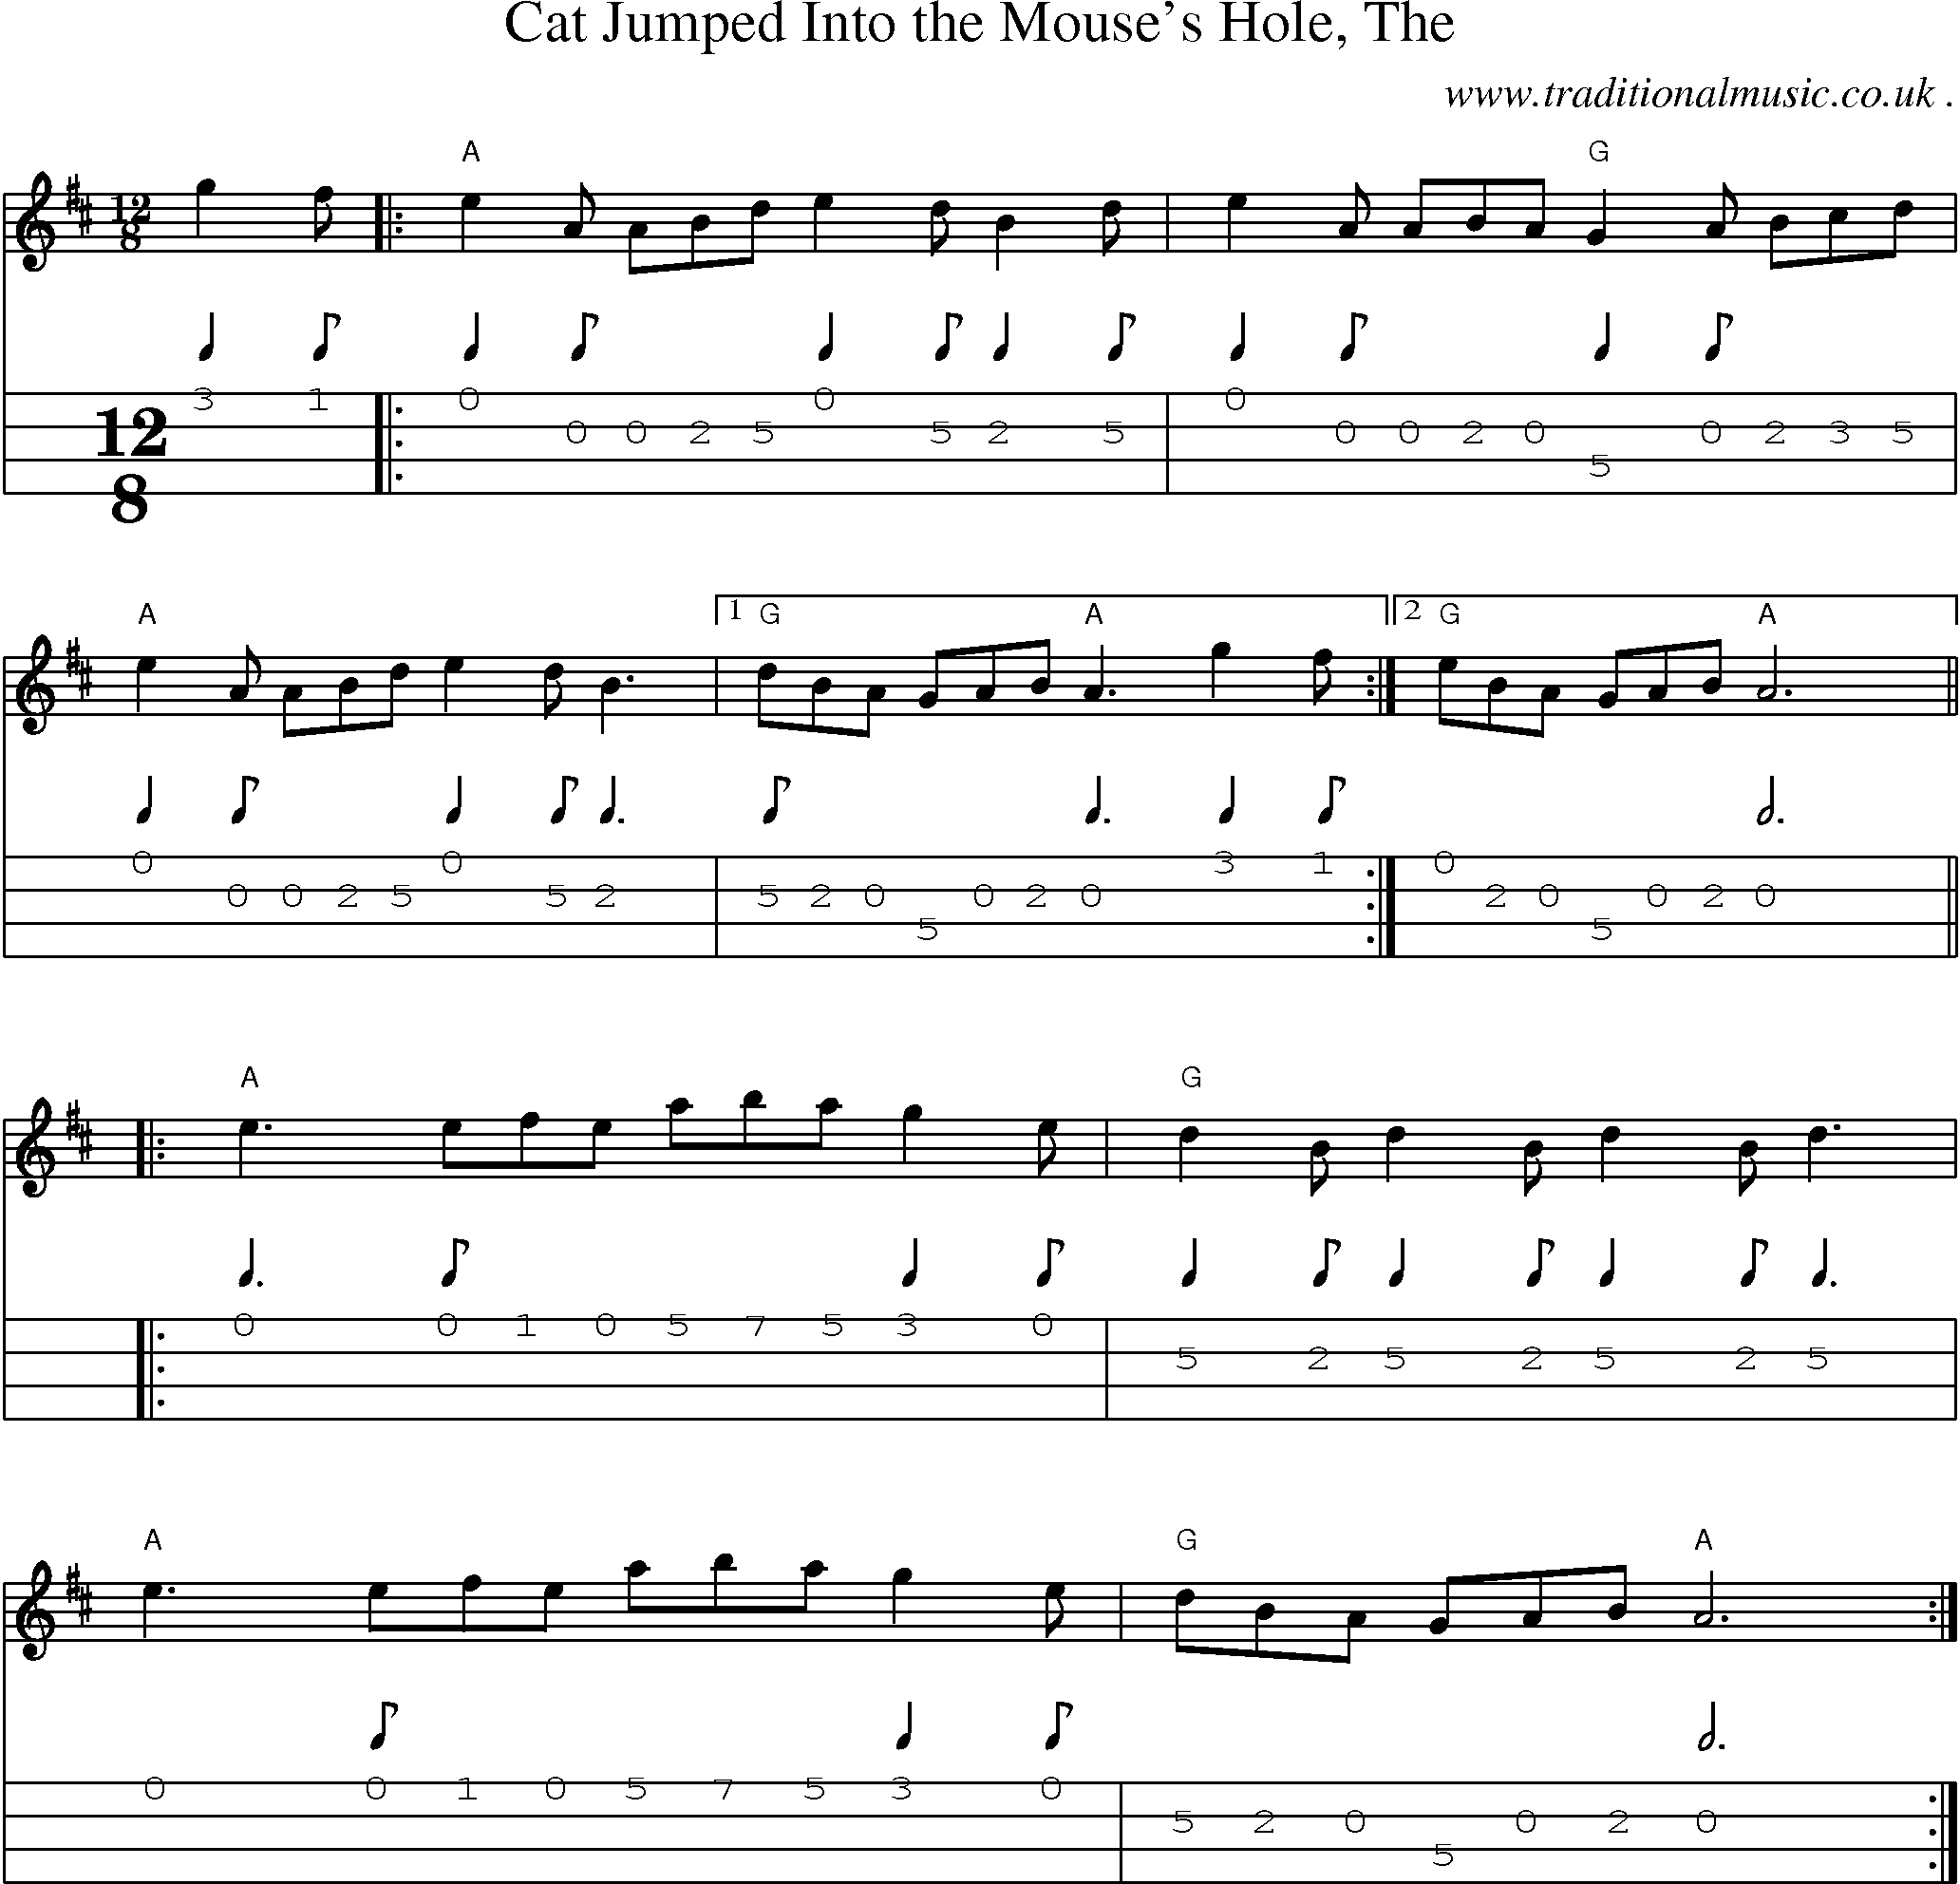 Music Score and Mandolin Tabs for Cat Jumped Into The Mouses Hole